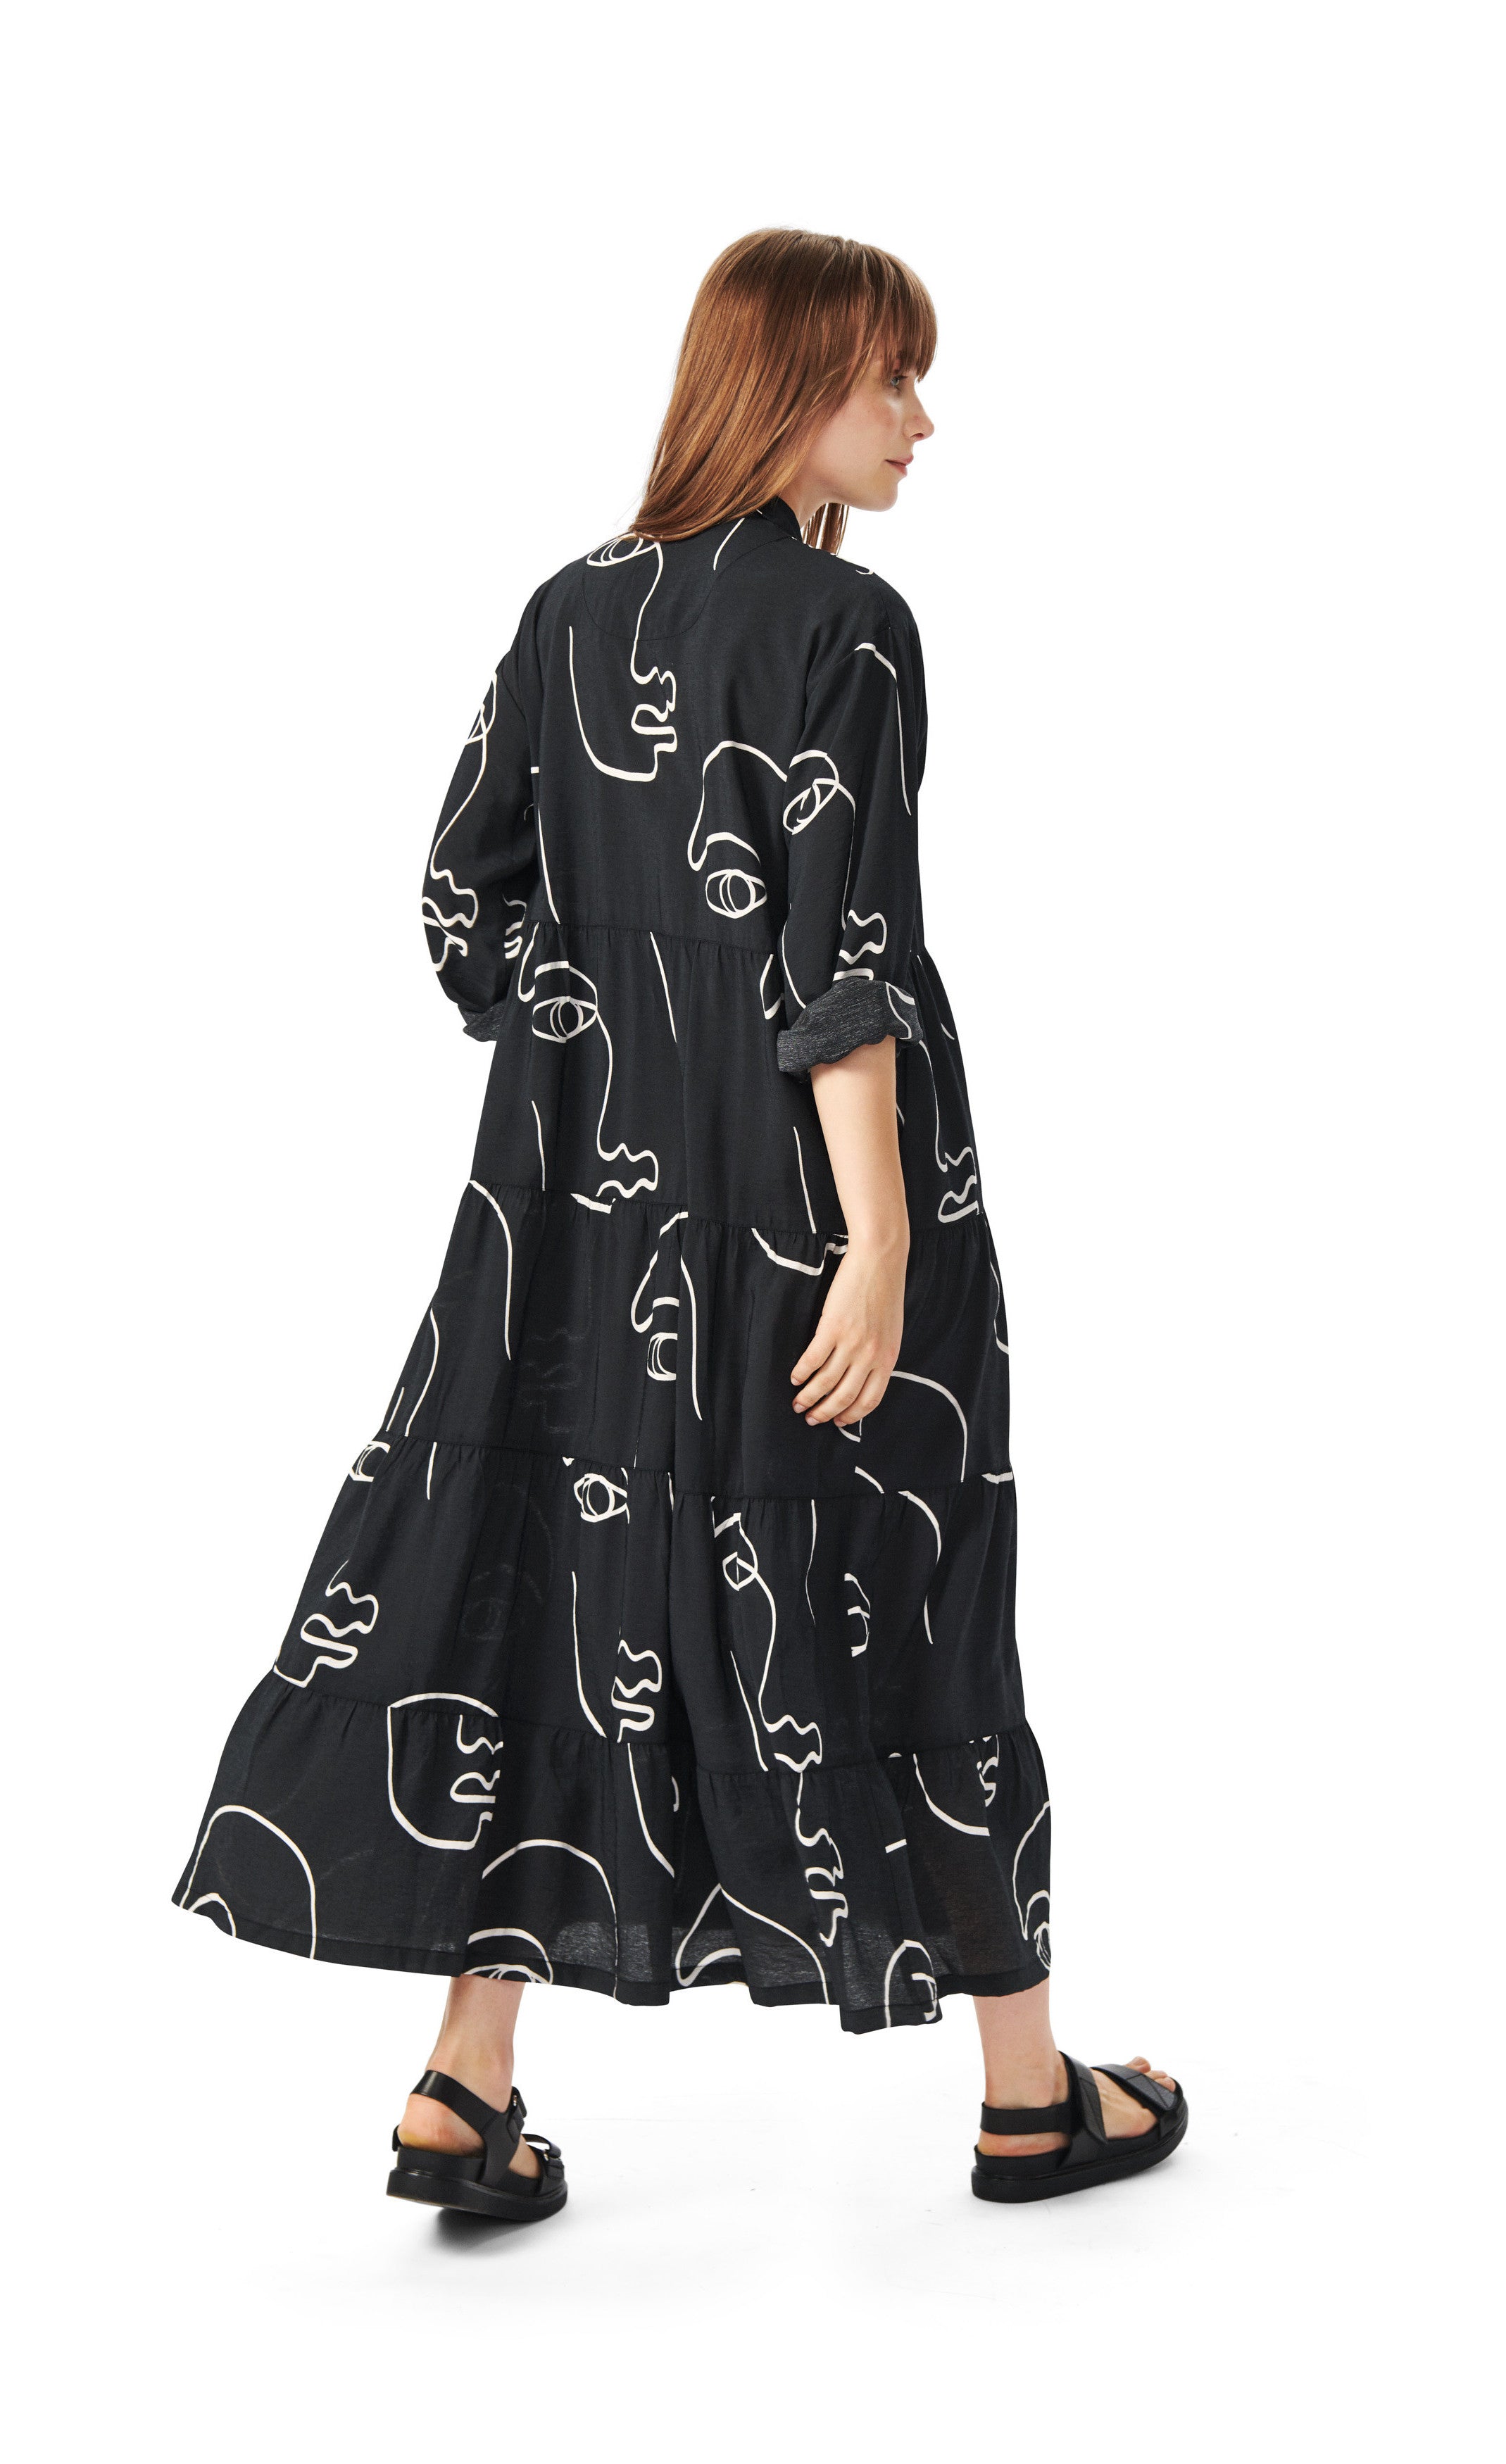 Back full body view of a woman wearing the bitte kai rand sketch viscose long dress. This dress is black with white sketches of faces all over it. The dress has long sleeves that are folded up and a ruffled bottom half.